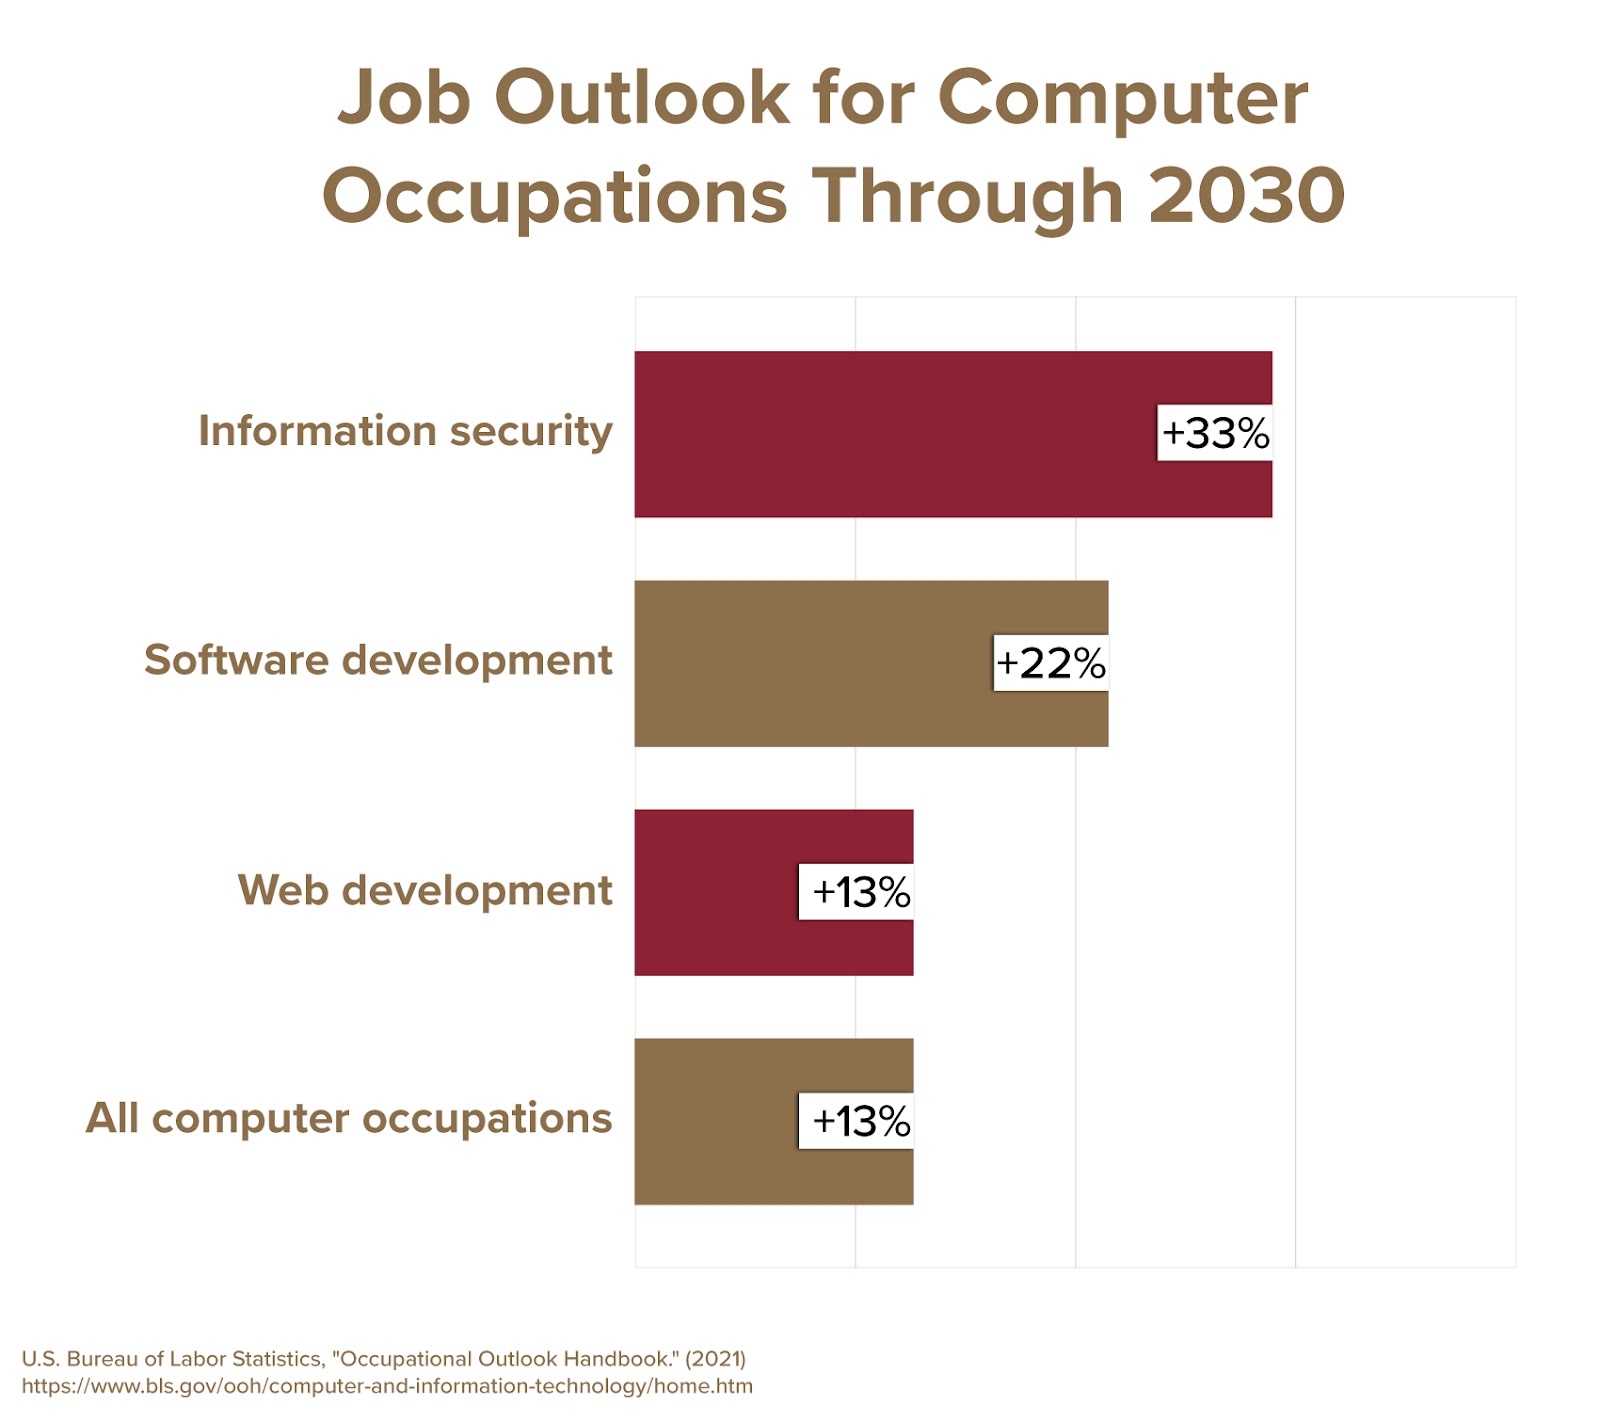 An image showcasing the job outlook for computer occupations through 2030.